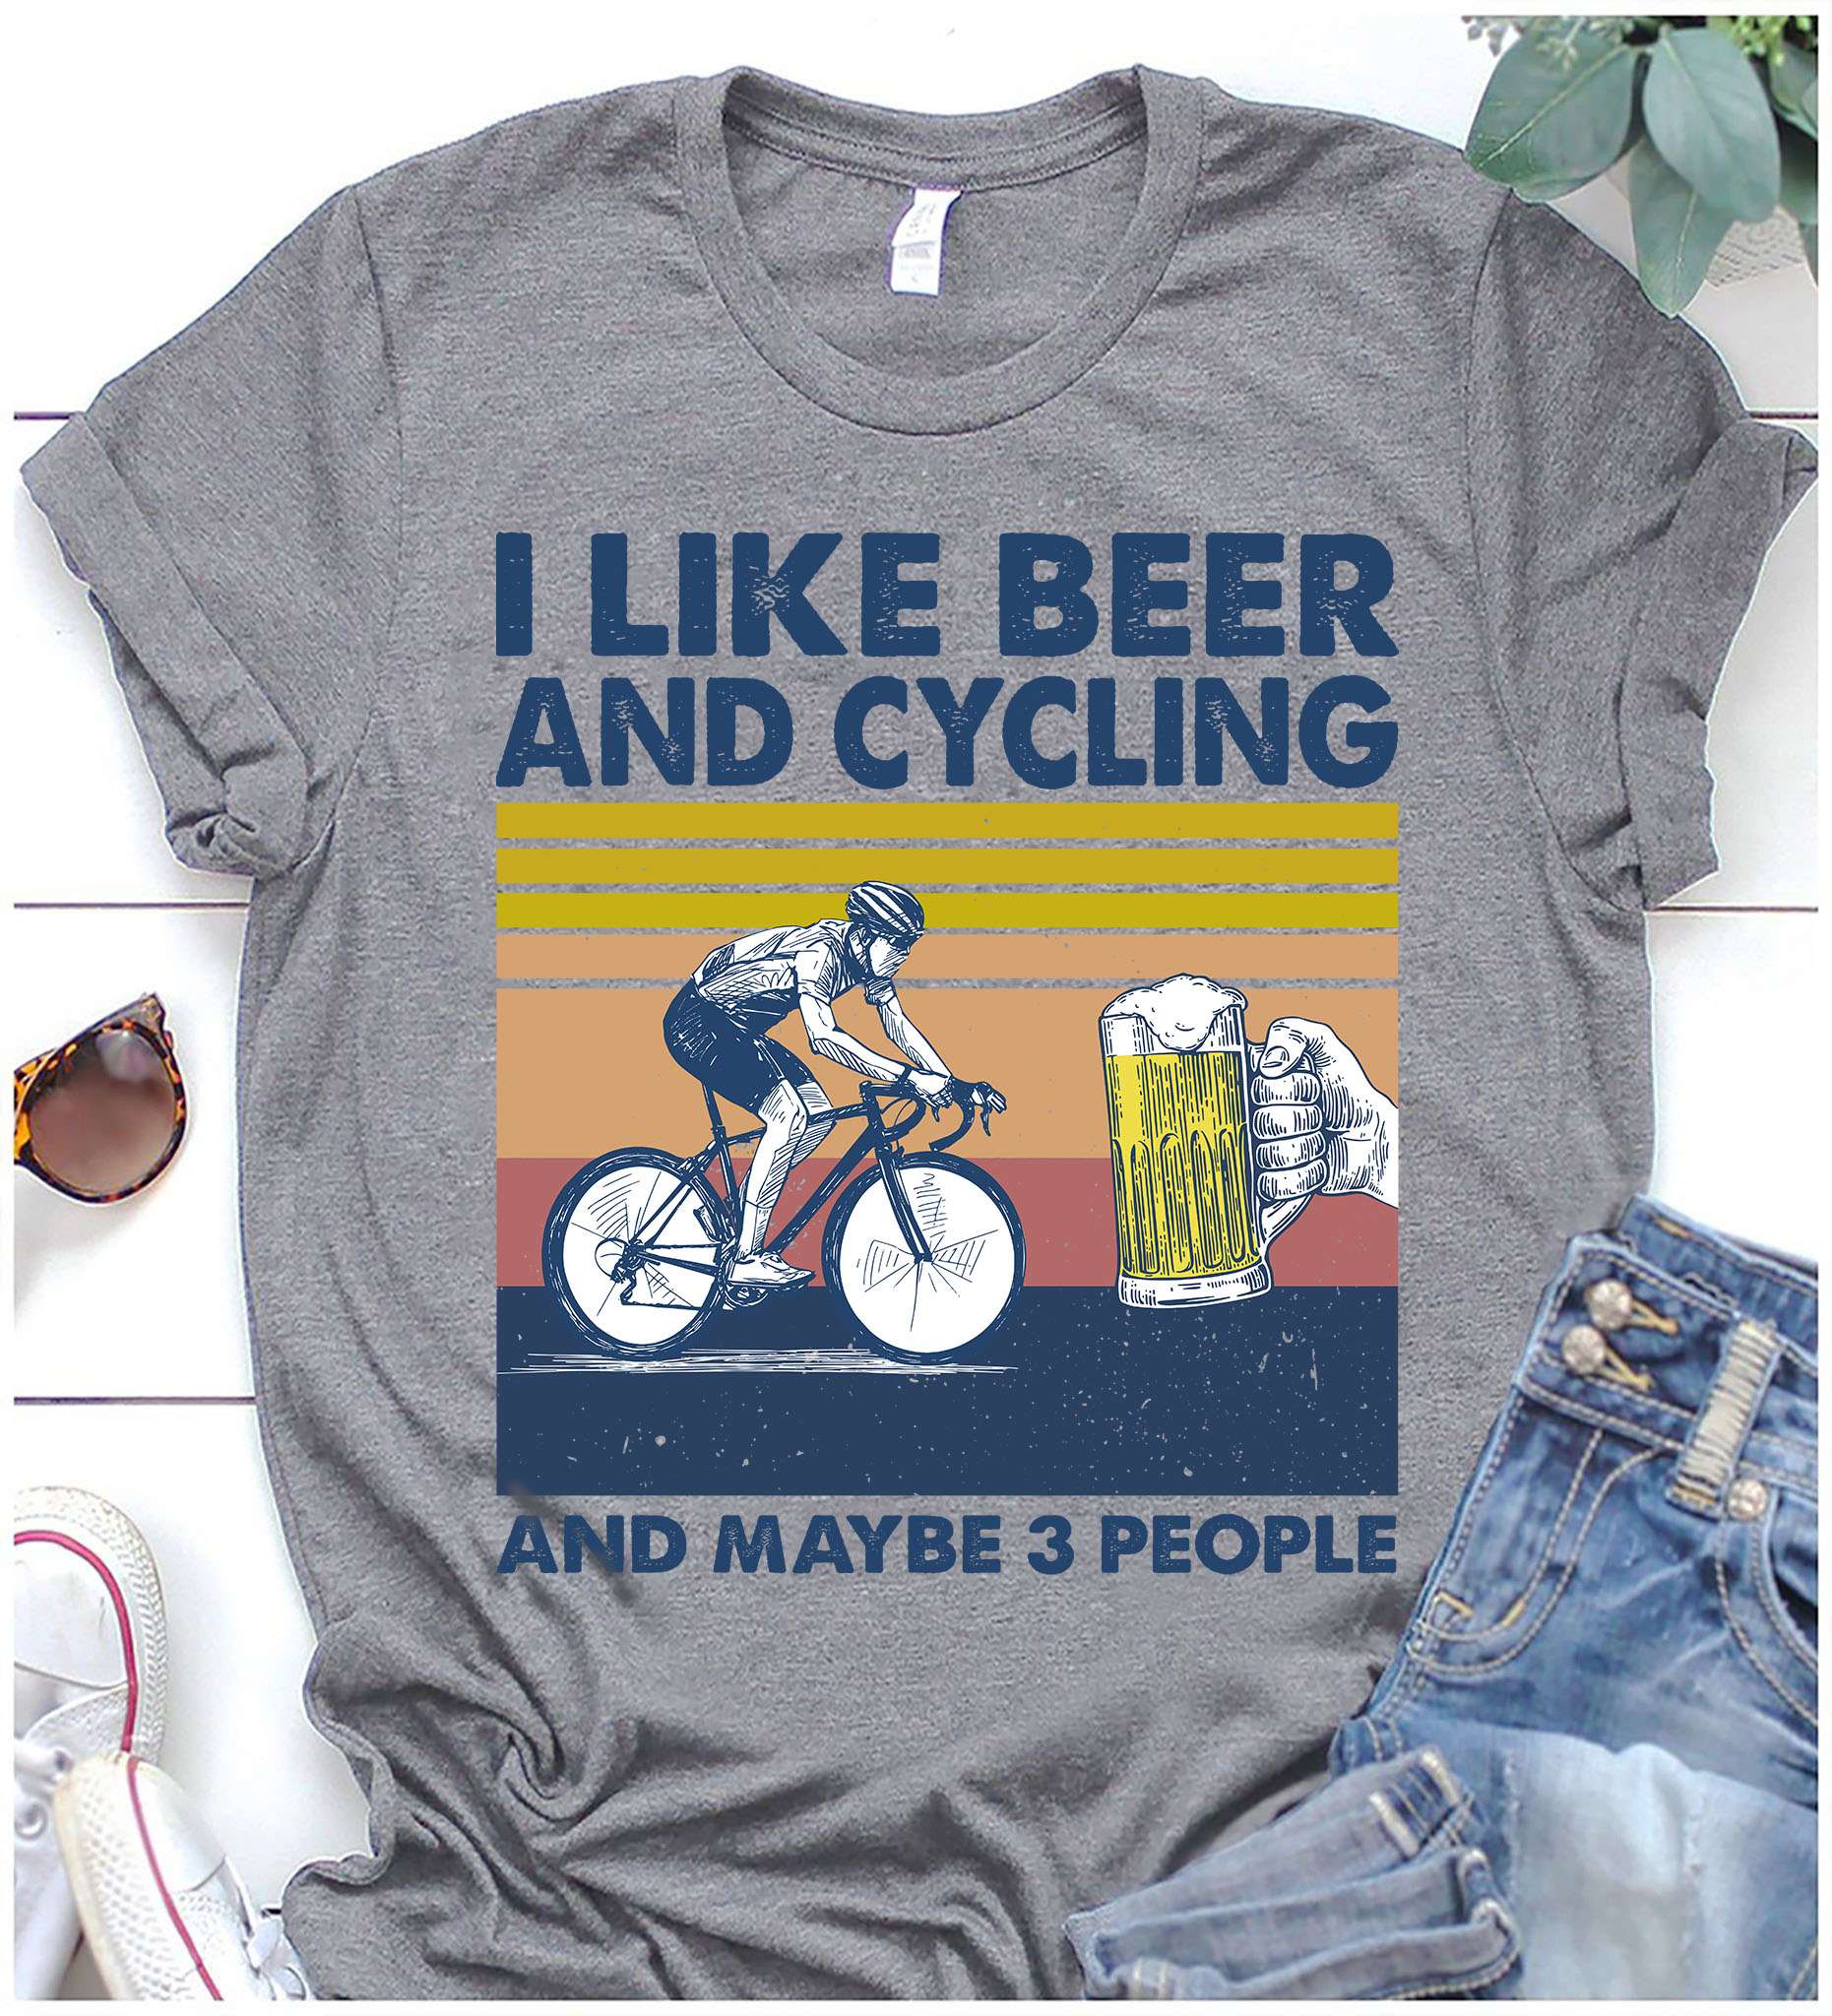 I like beer and cycling and maybe 3 people - Biker loves beer, beer drinker gift